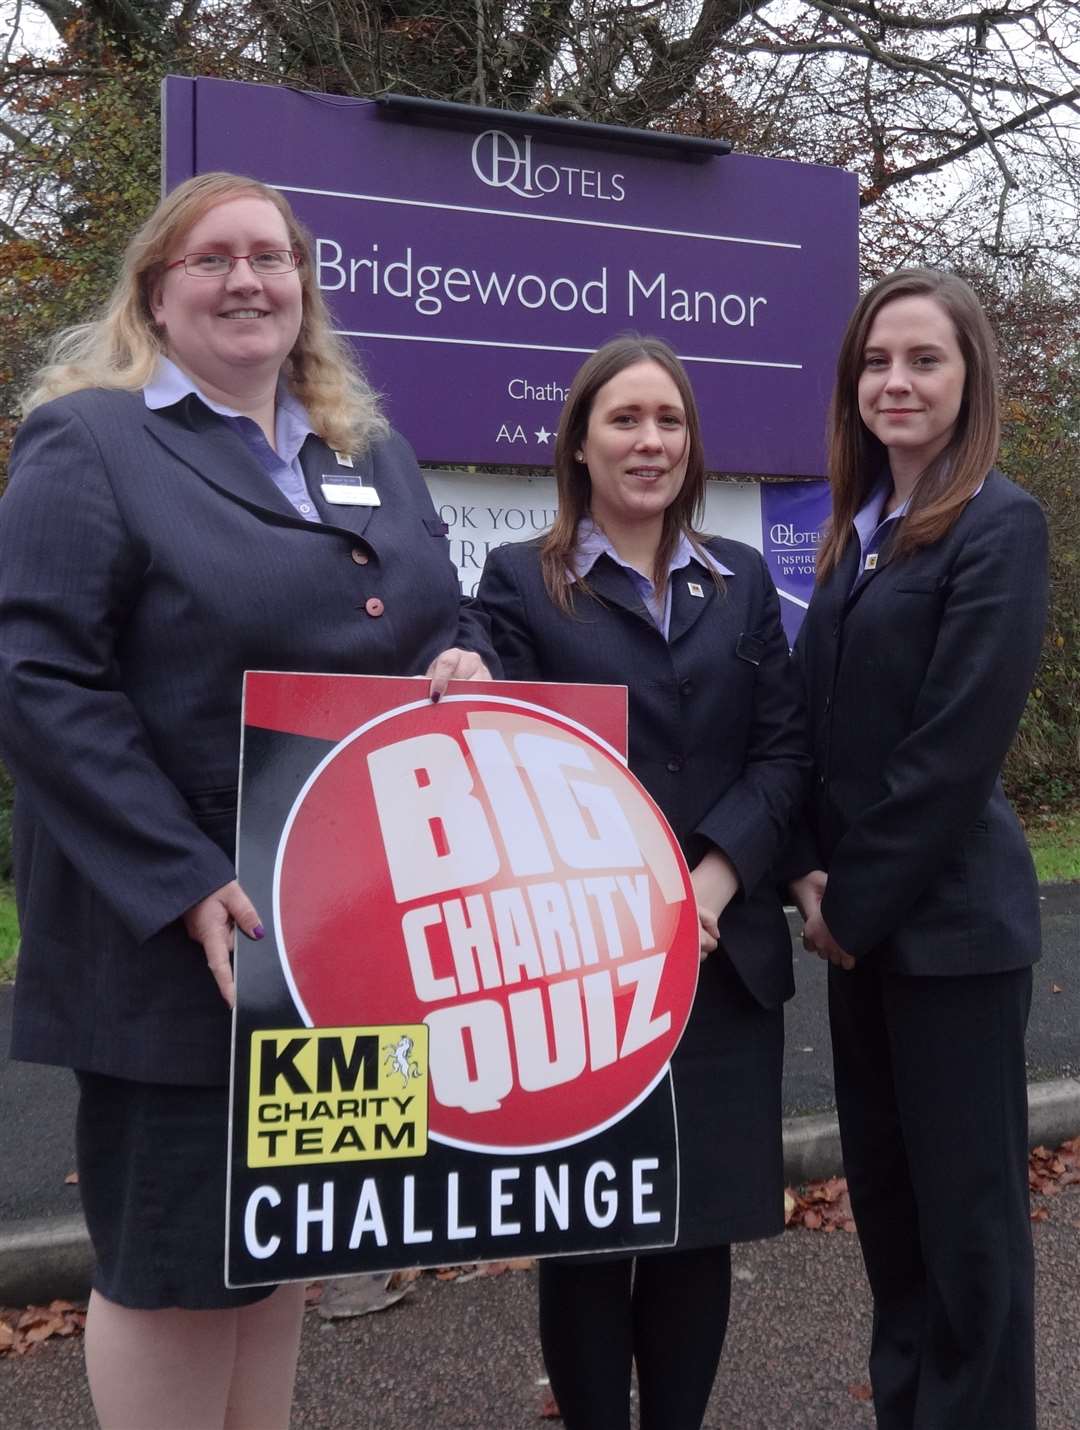 Sales Office Manager at Bridgewood Manor Rebecca Naylor (left) along with the events team are proud the venue is hosting the KM Big Charity Quiz final this Sunday